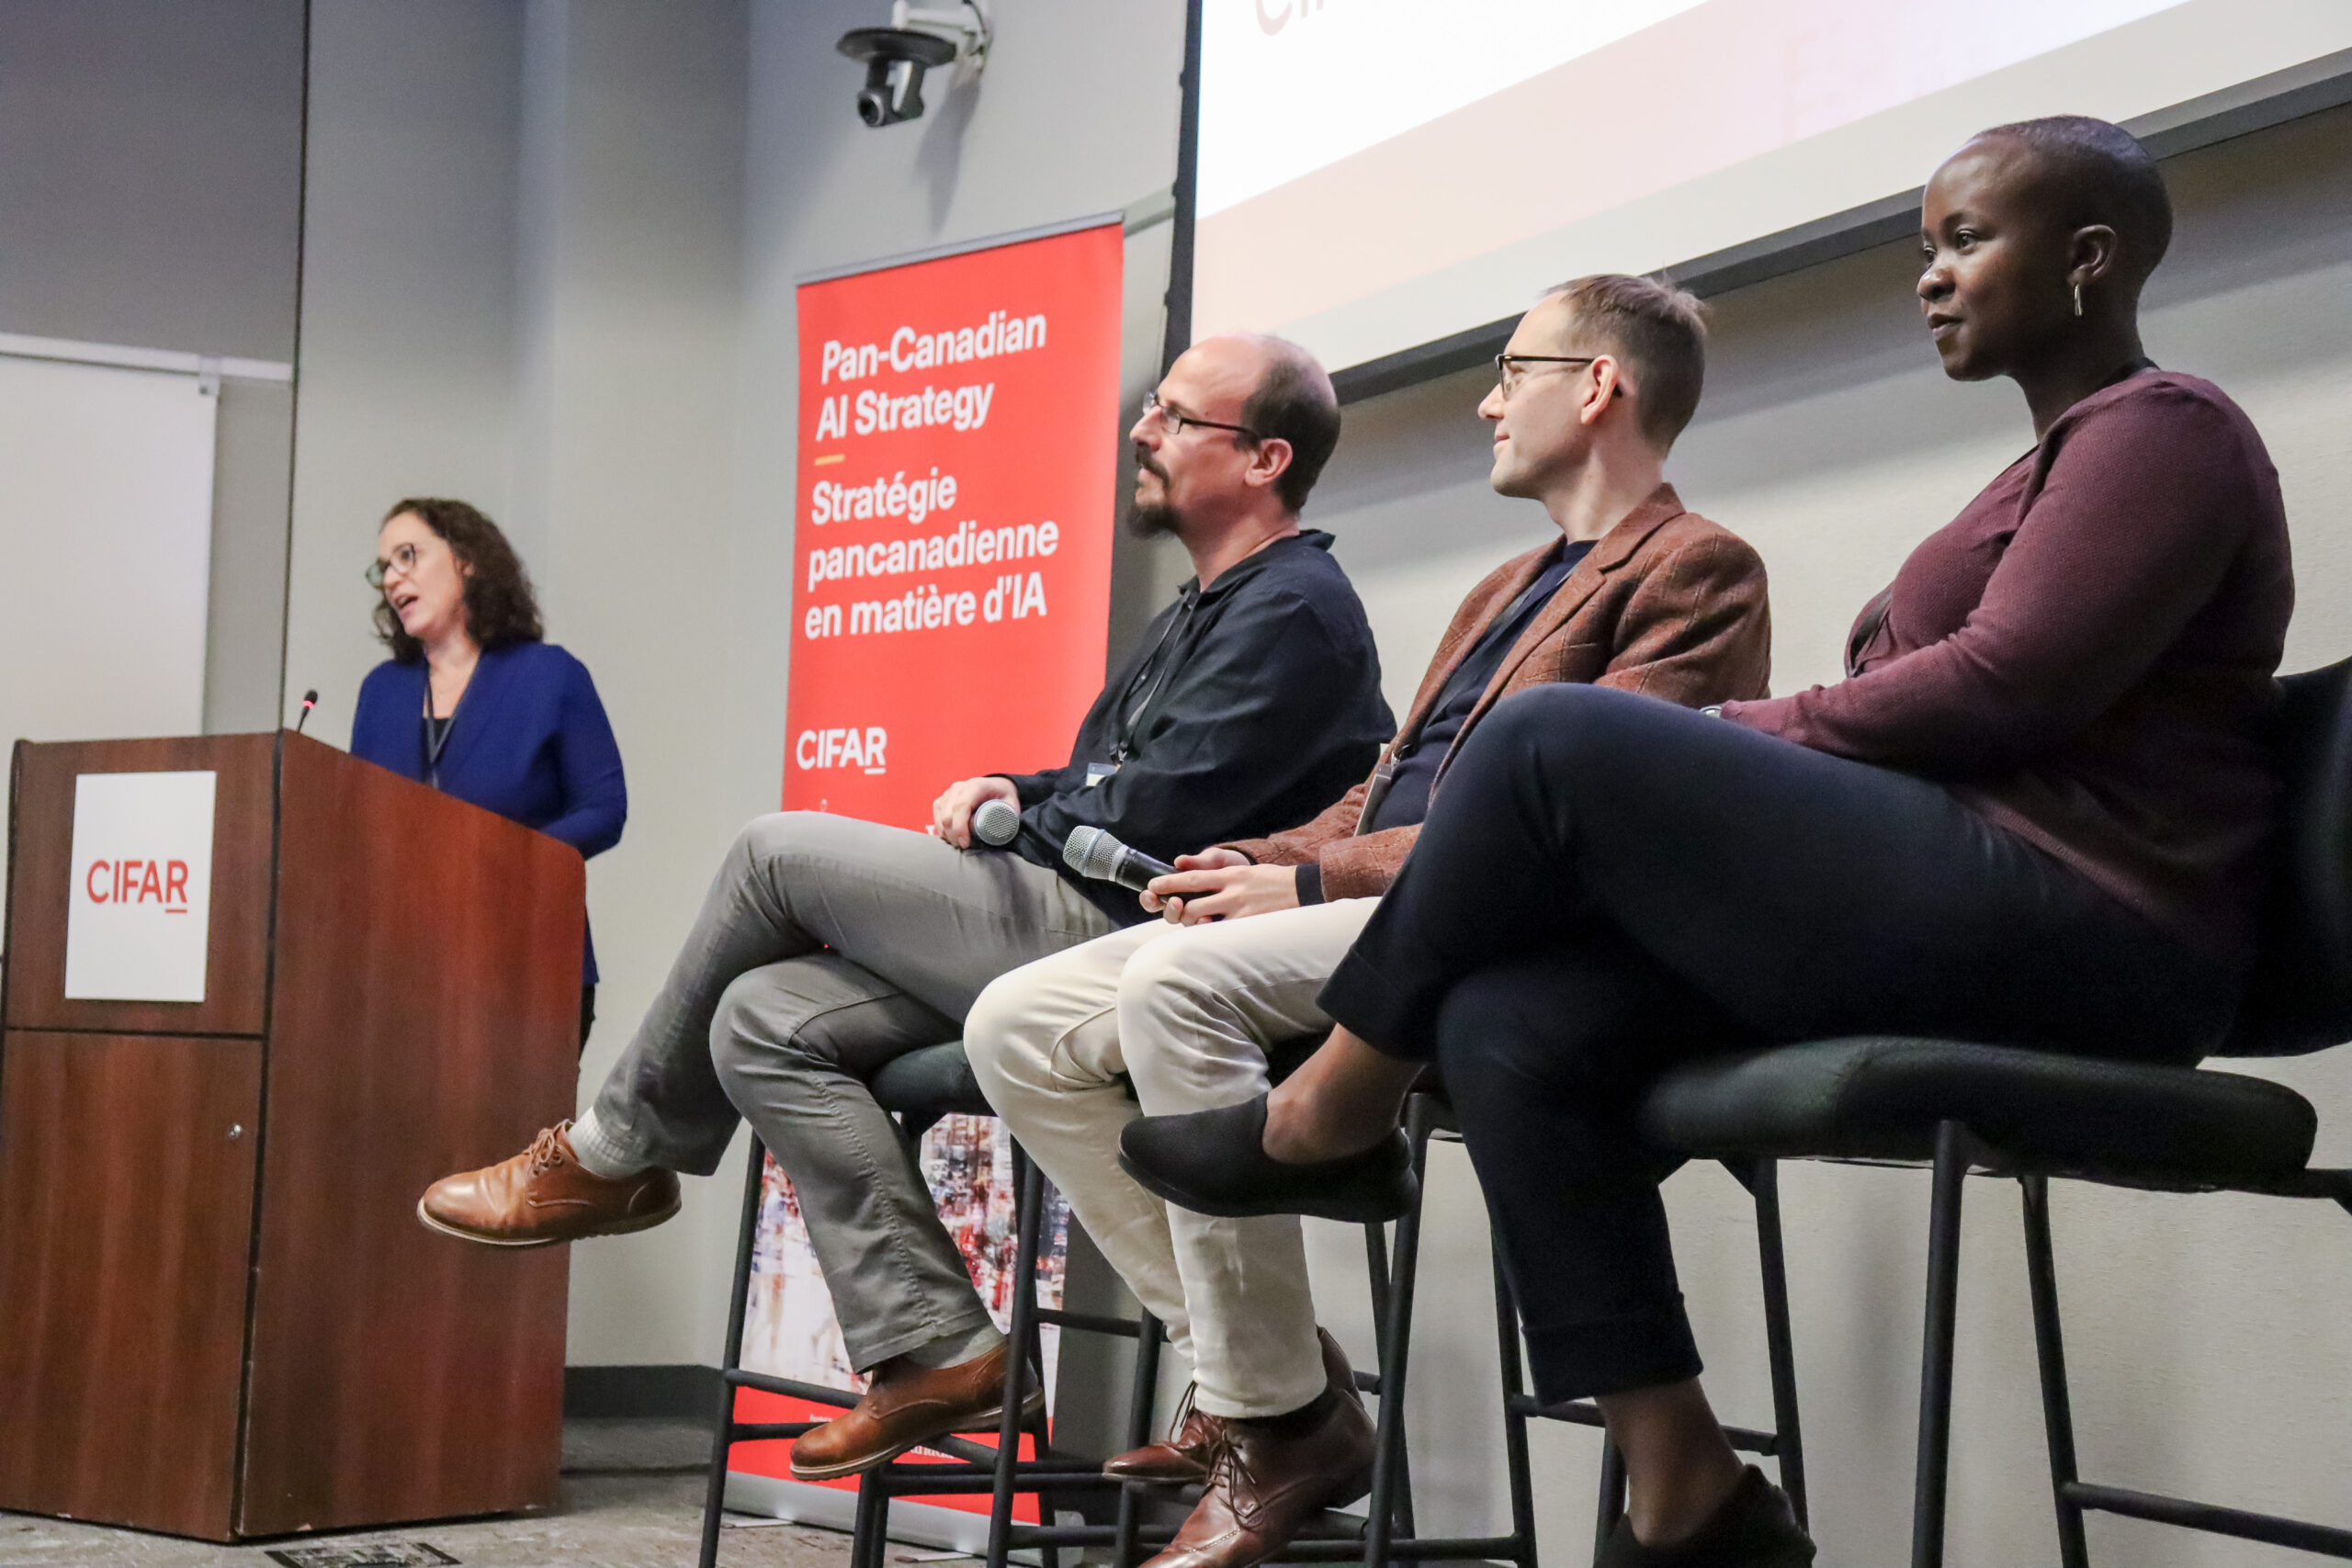 Elissa Strome, Executive Director of the Pan-Canadian AI Strategy at CIFAR moderates a panel discussion with industry leaders Guillaume Rabusseau, Marc Bellemare and Shingai Manjengwa.